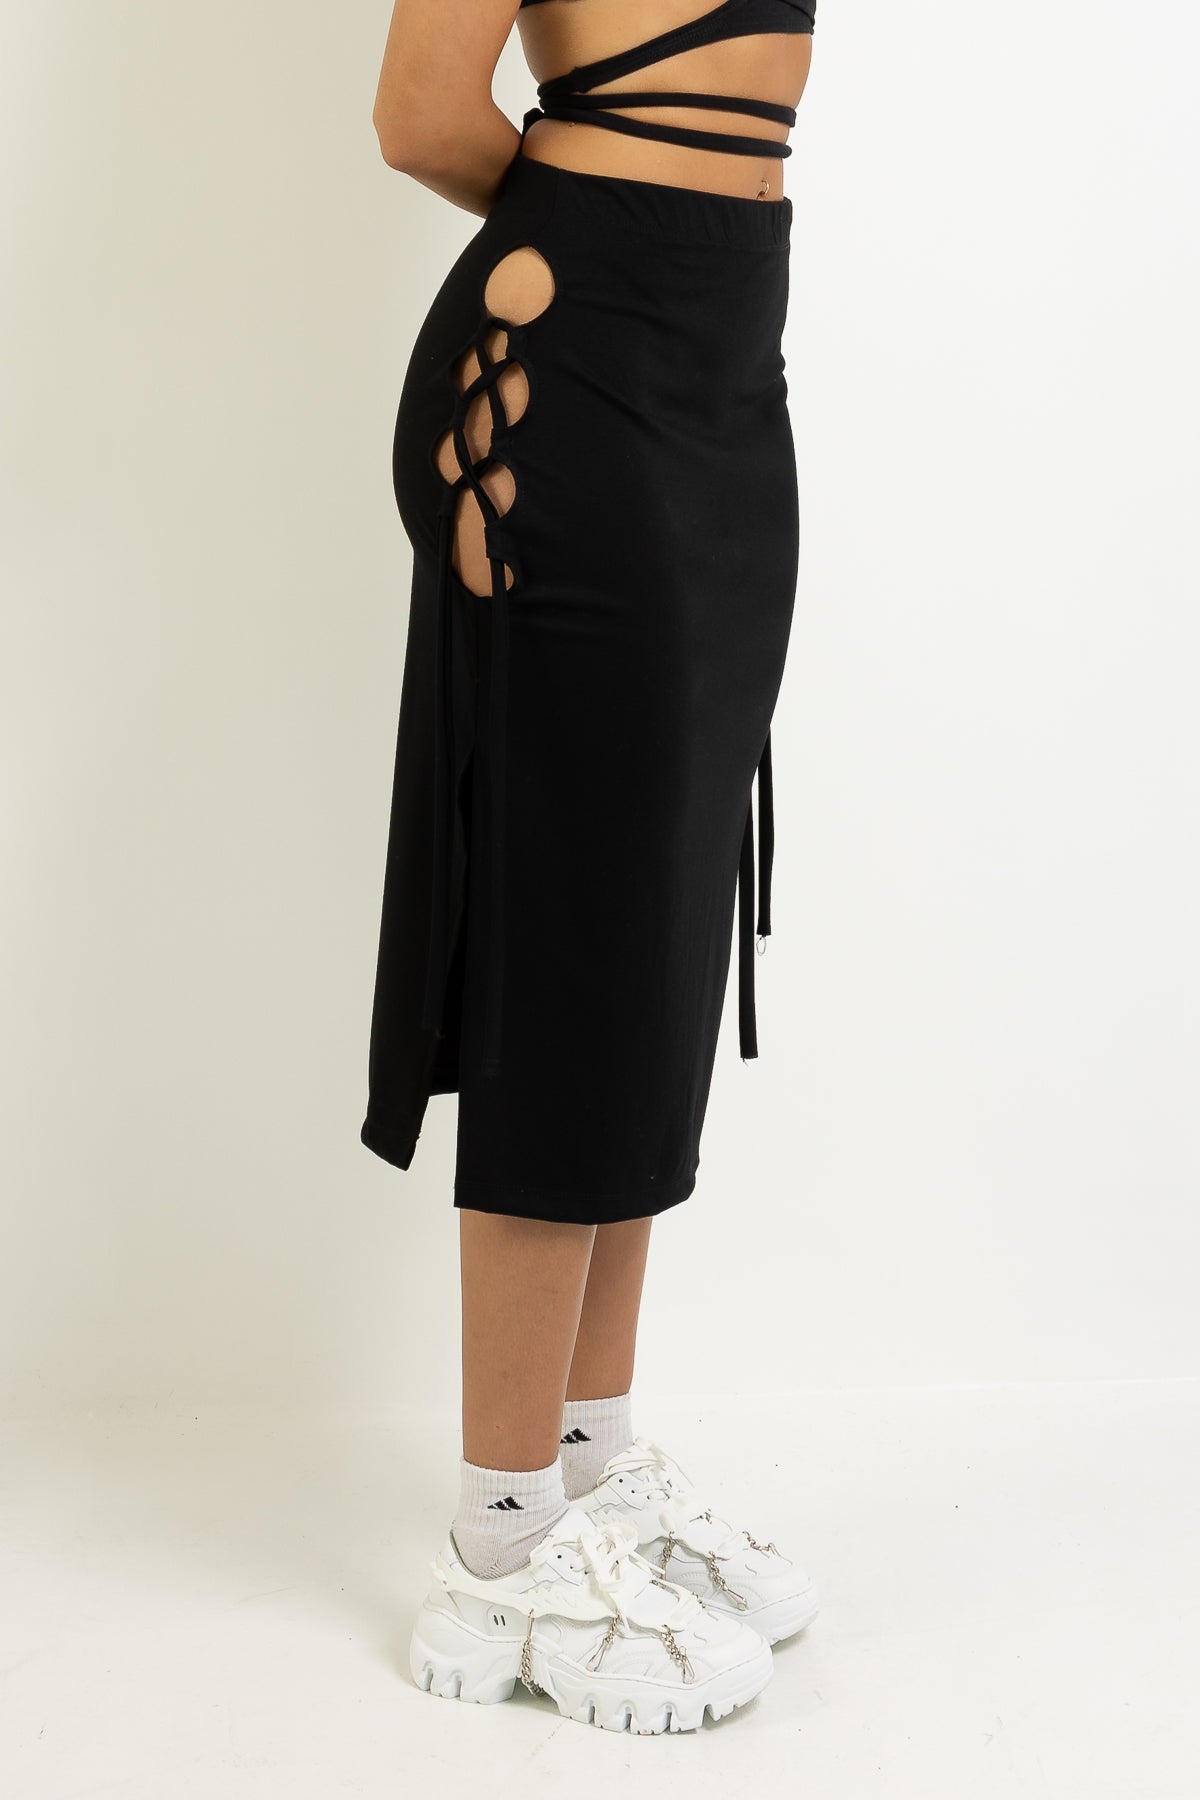 HEBE LACE UP SKIRT - MERCY HOUSE